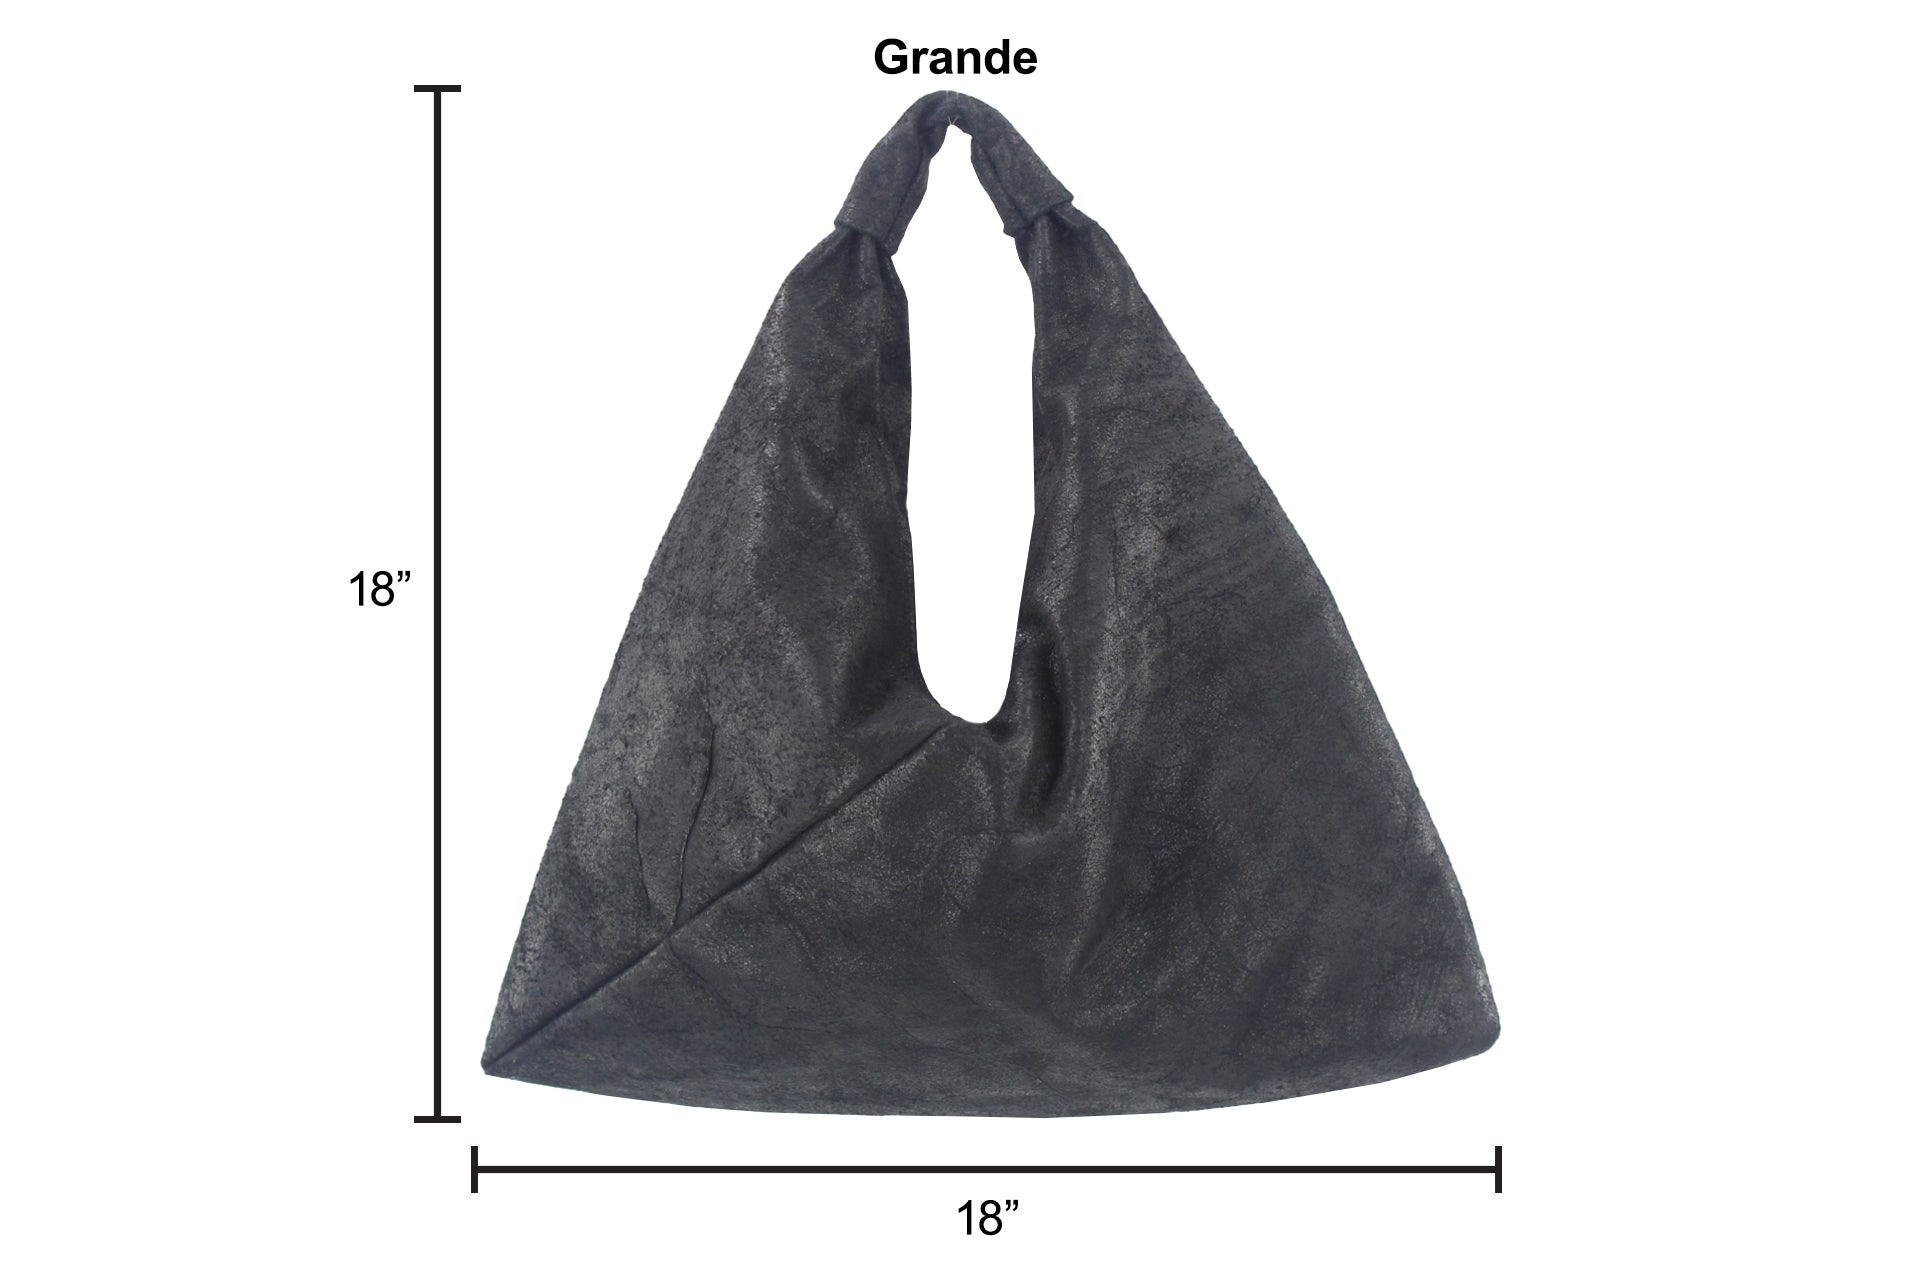 dimensions for 18" x 18" hobo bag